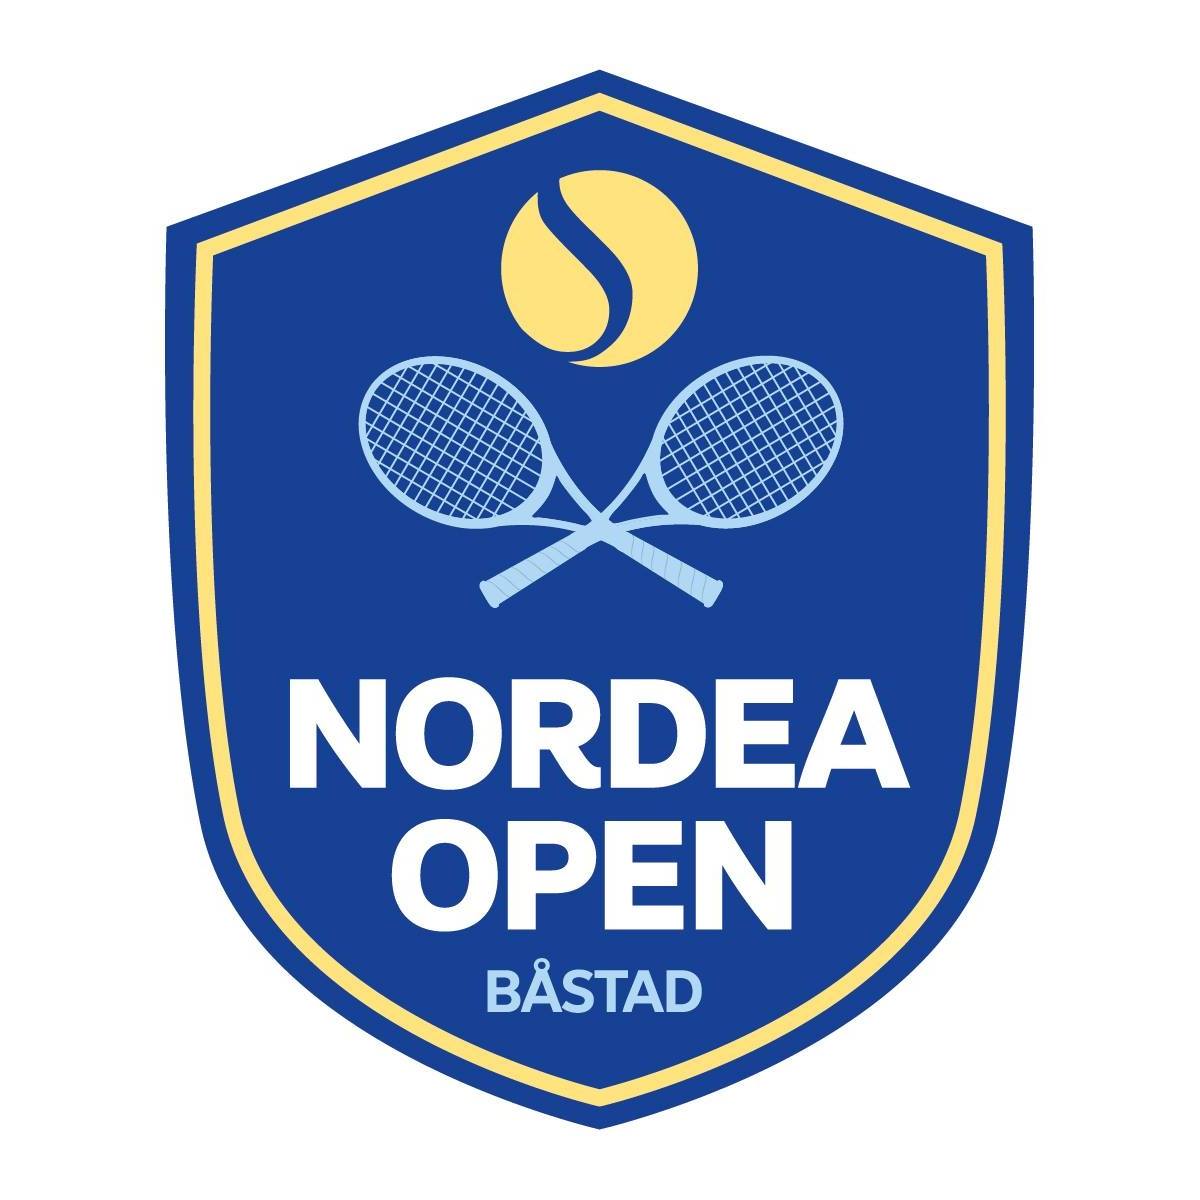 Book your activities and accommodation with Nordea Open